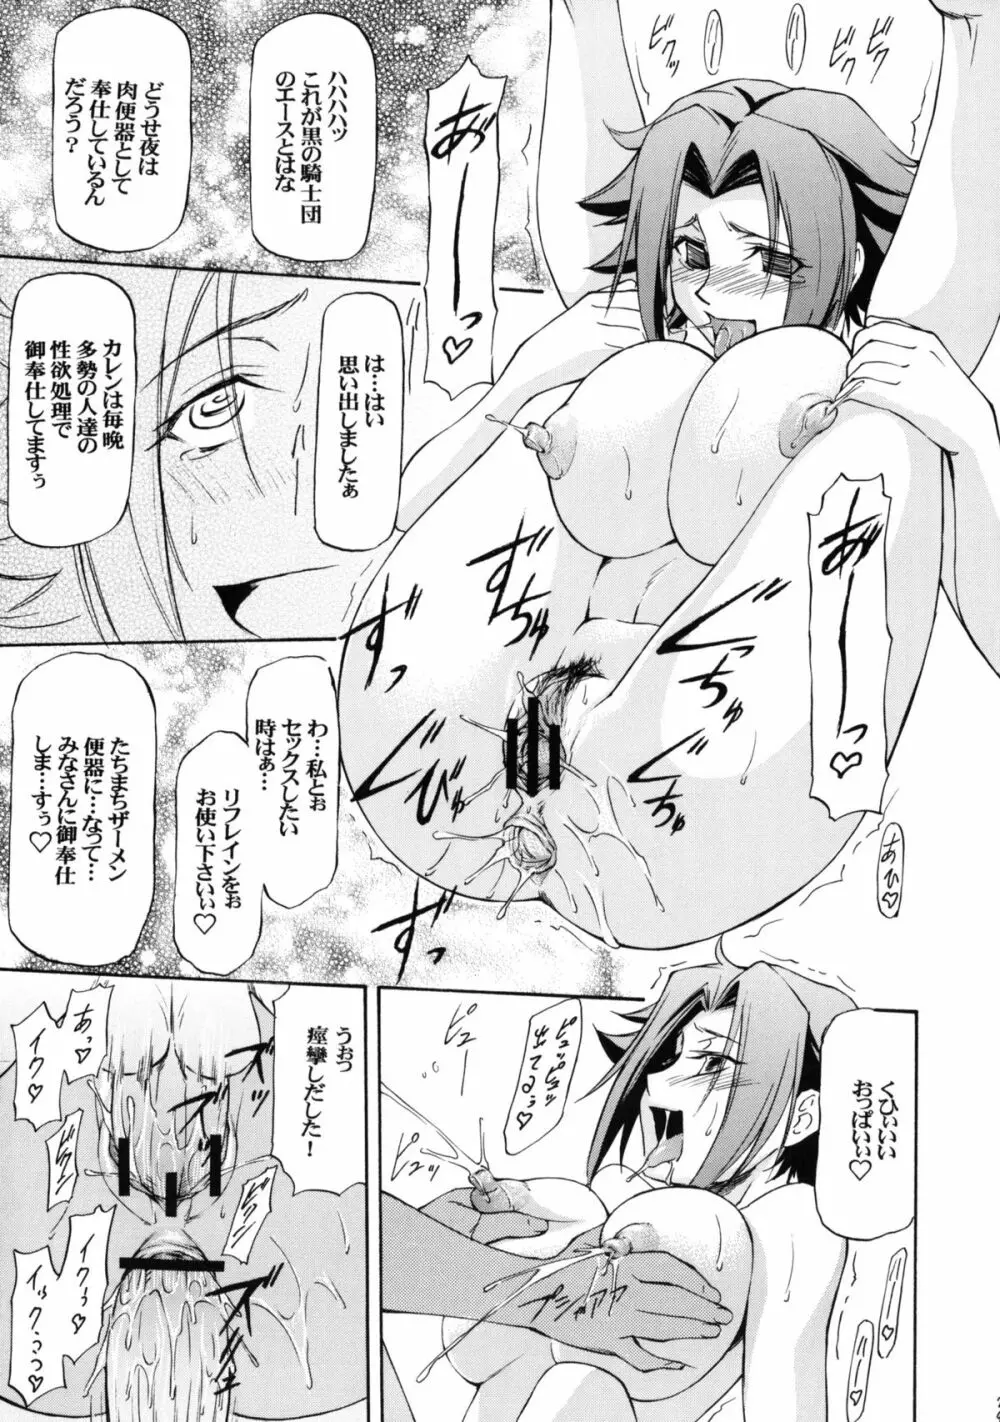 LeLeぱっぱ Vol.16 Re;Re; - page30